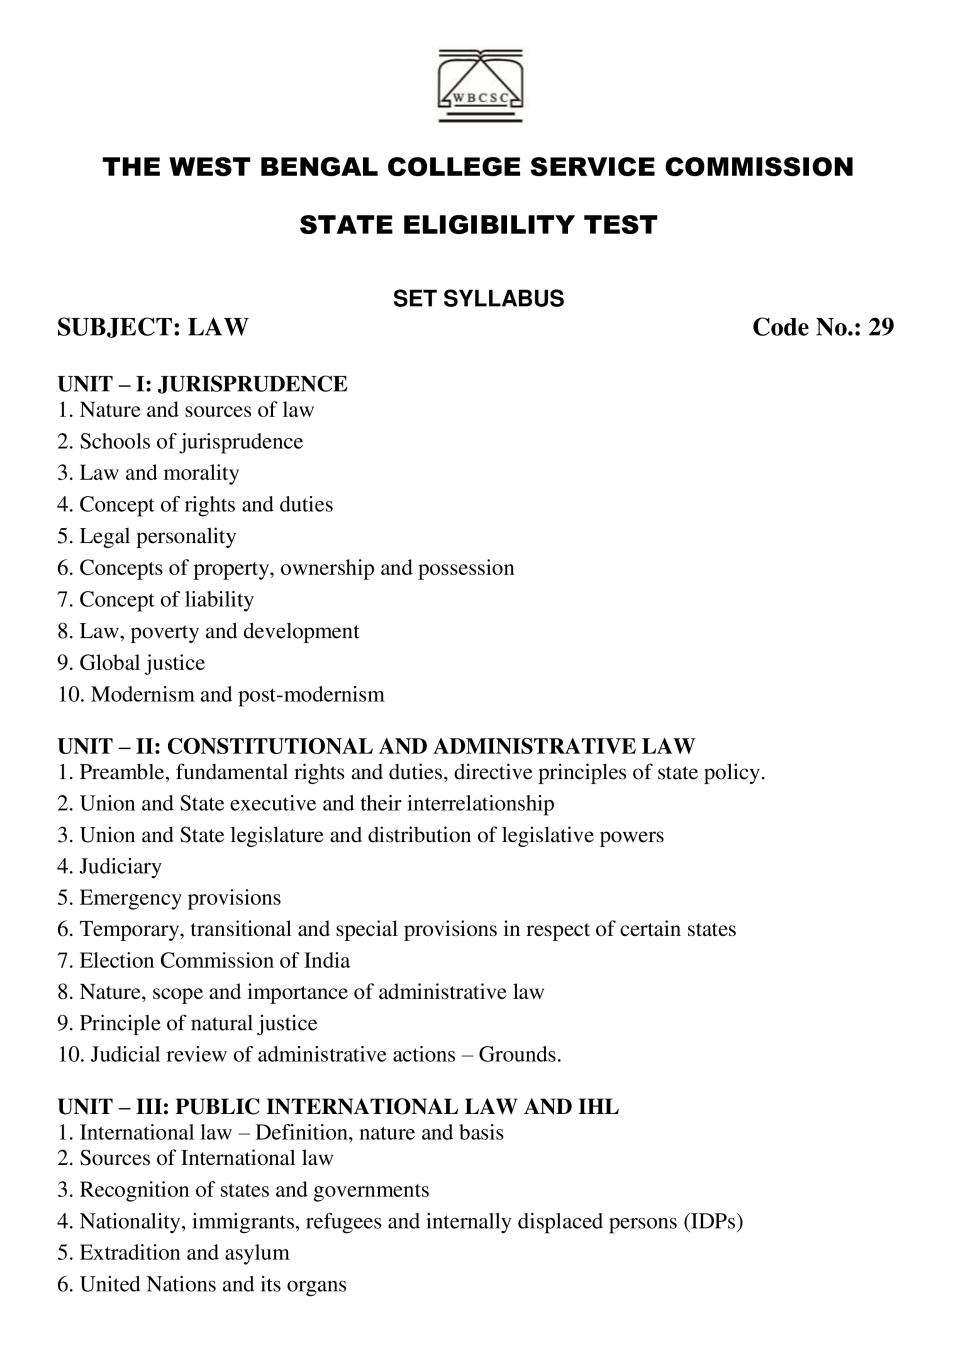 WB SET Syllabus for Law - Page 1